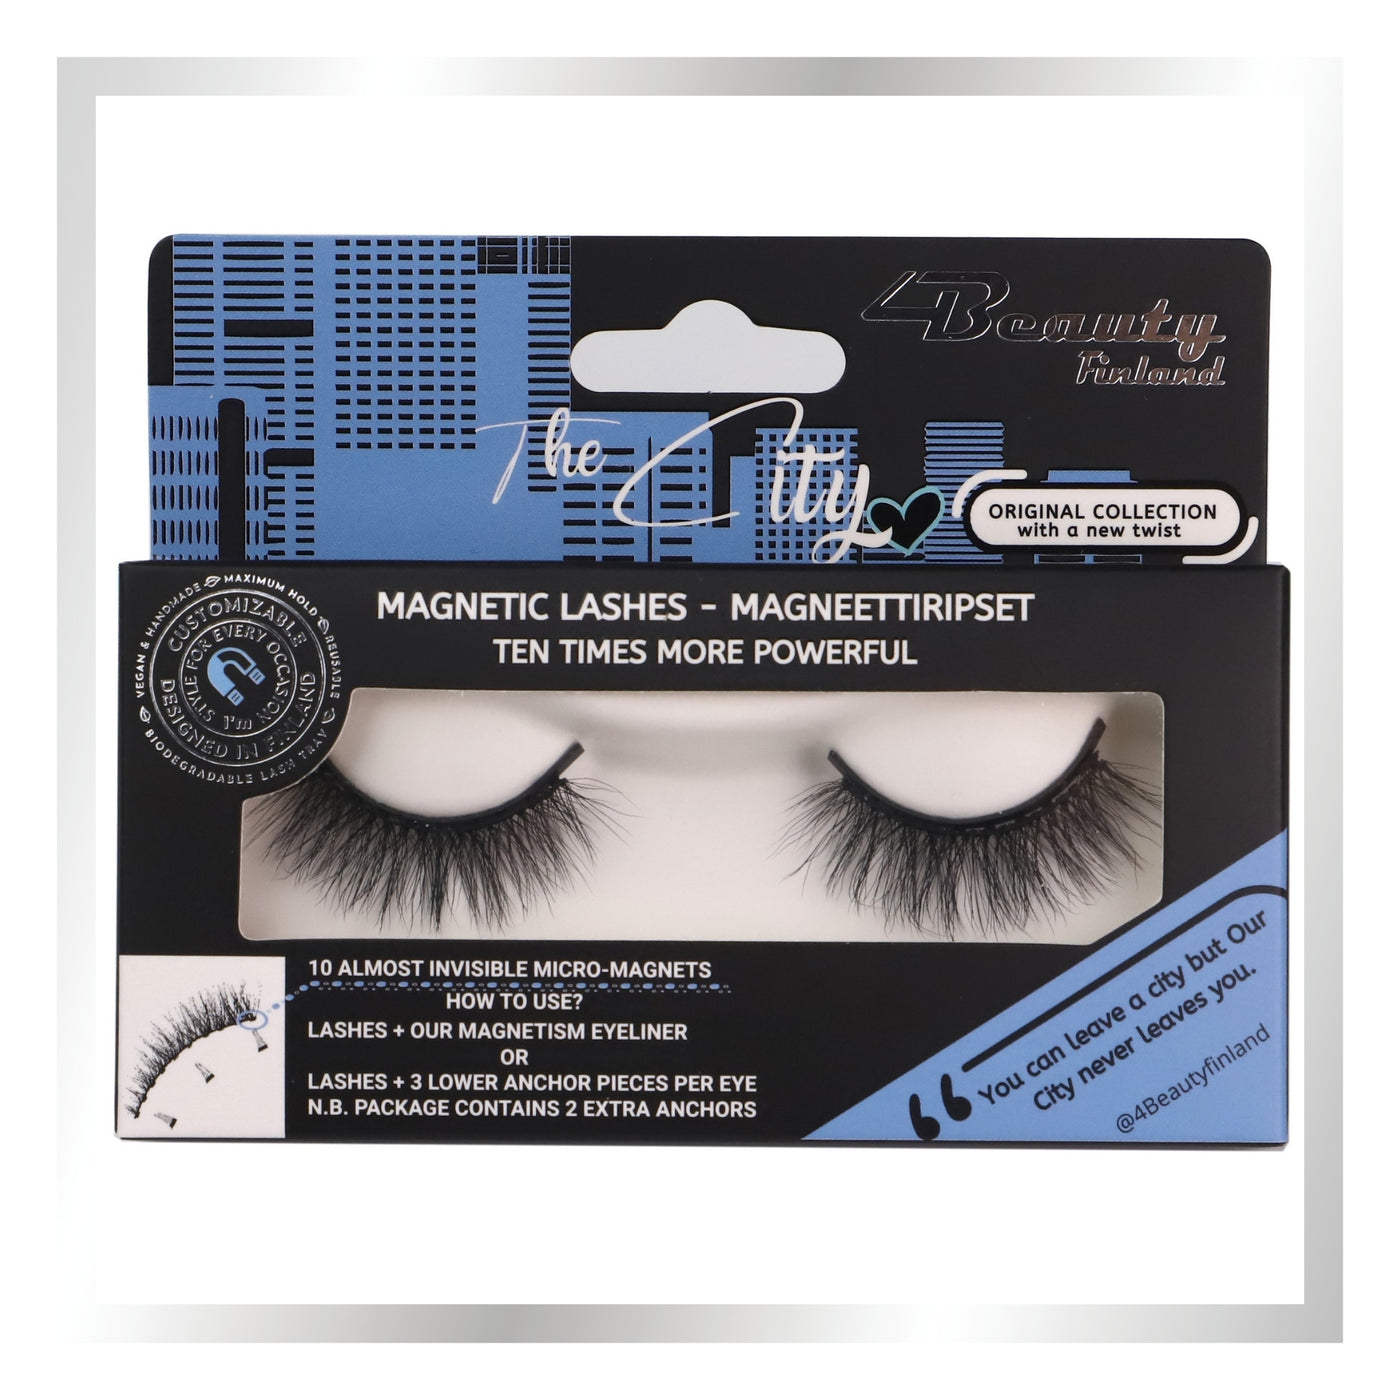 Magneettiripset 4Beauty Finland Magnetic Lashes The City Helsinki